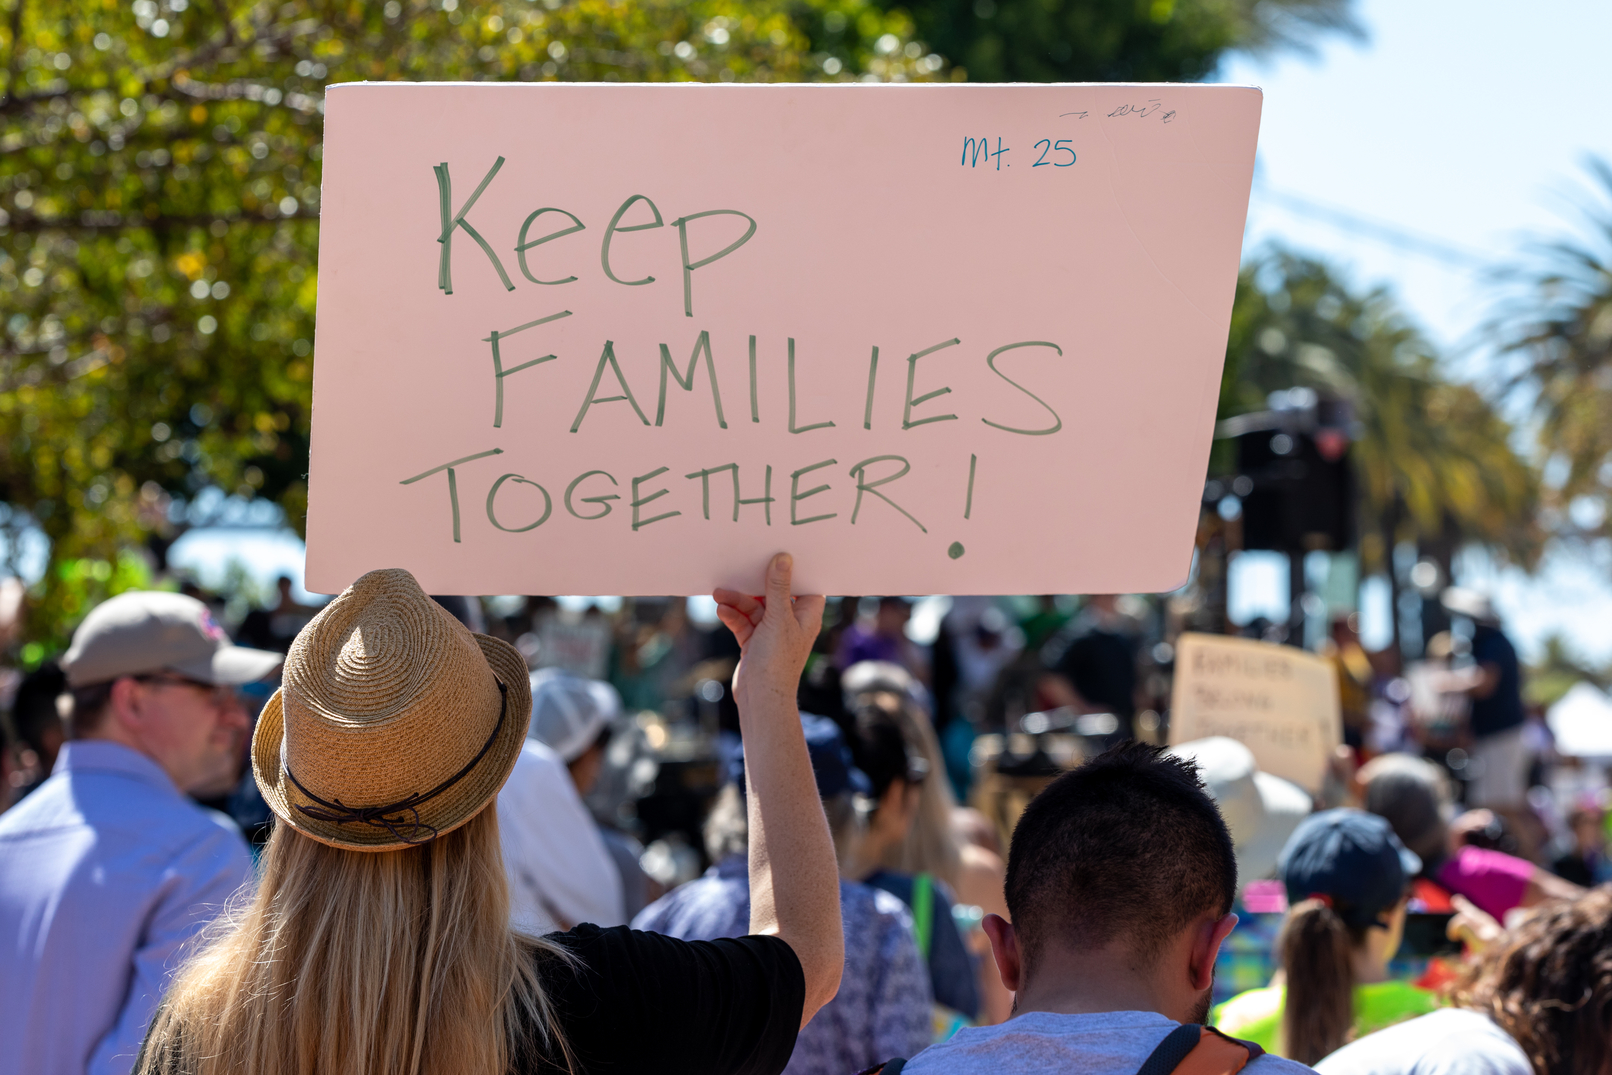 U.S. District Court Judge Rules That Separated Immigrant Children Must be Reunited With Parents Within Thirty Days